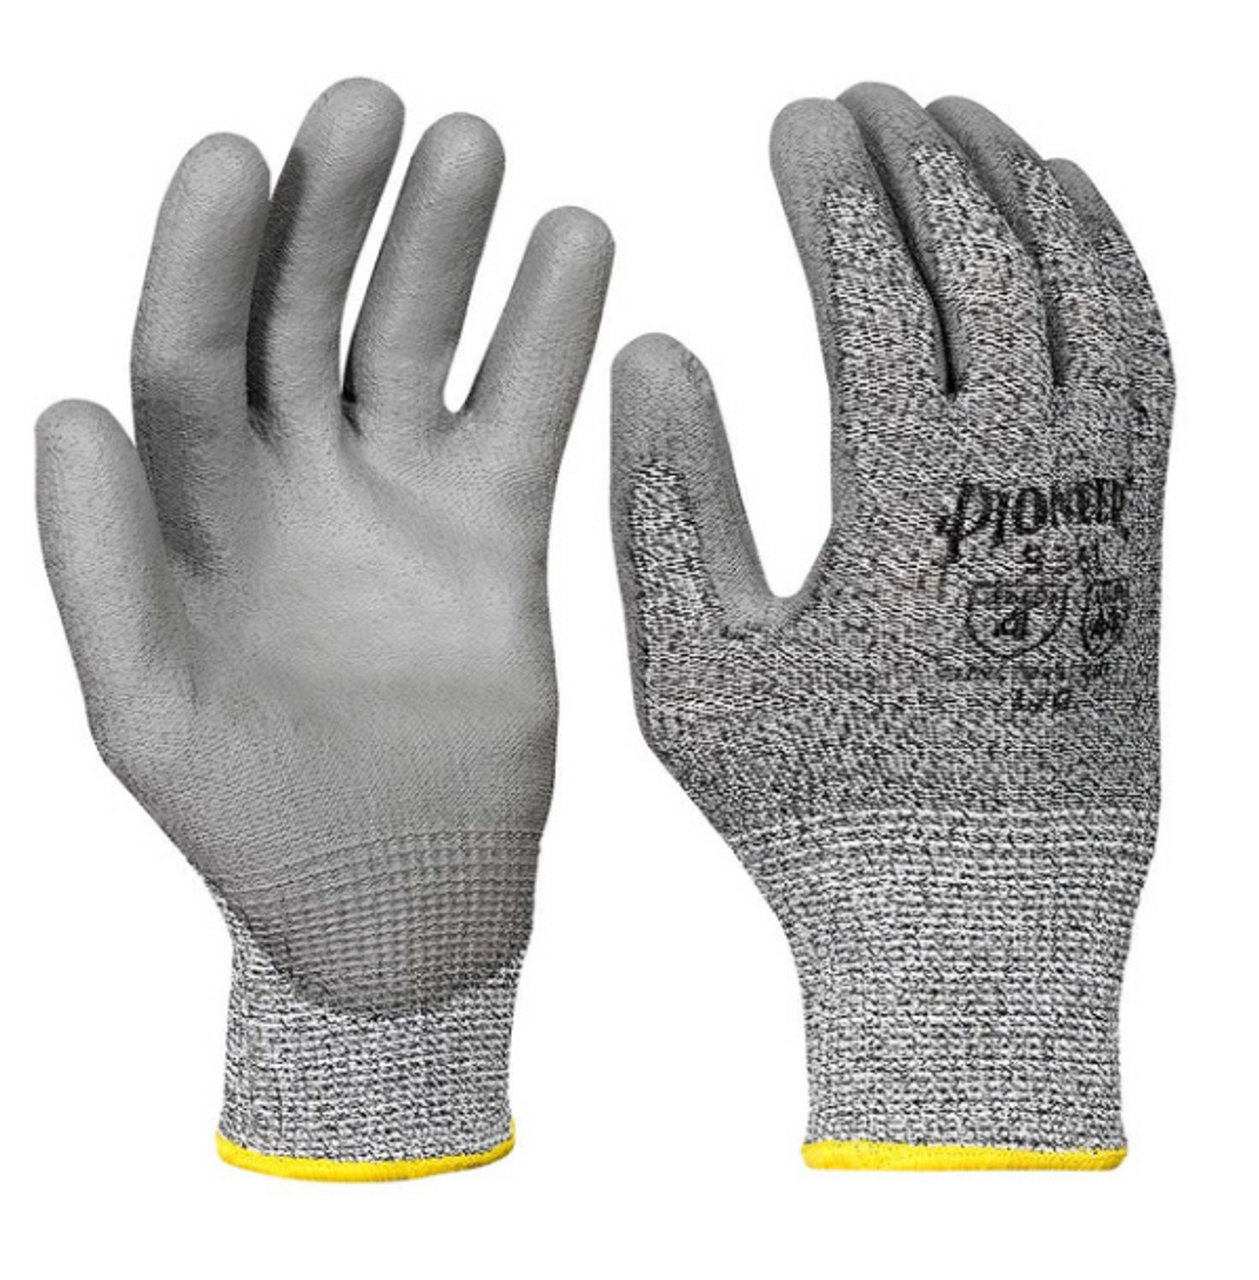 • Features – These level 4, Cut-Resistant Gloves and made from a 13-gauge composite filament and a non-coated back, that provides increased breathability and flexibility

• Benefits – The ergonomic PU-coated palm and finger deliver a better grip and abrasion resistance, equipping these gloves with superior cut-resistance and dexterity

• Applications – Designed to be used in various industries including automotive, glass & sheet metal handling, or metal stamping/fabrication

• Certification – Sold by the dozen, or 6 dz/pkg, these gloves administer ANSI level A4 cut-resistant protection and ANSI abrasion level 5 and puncture level 4